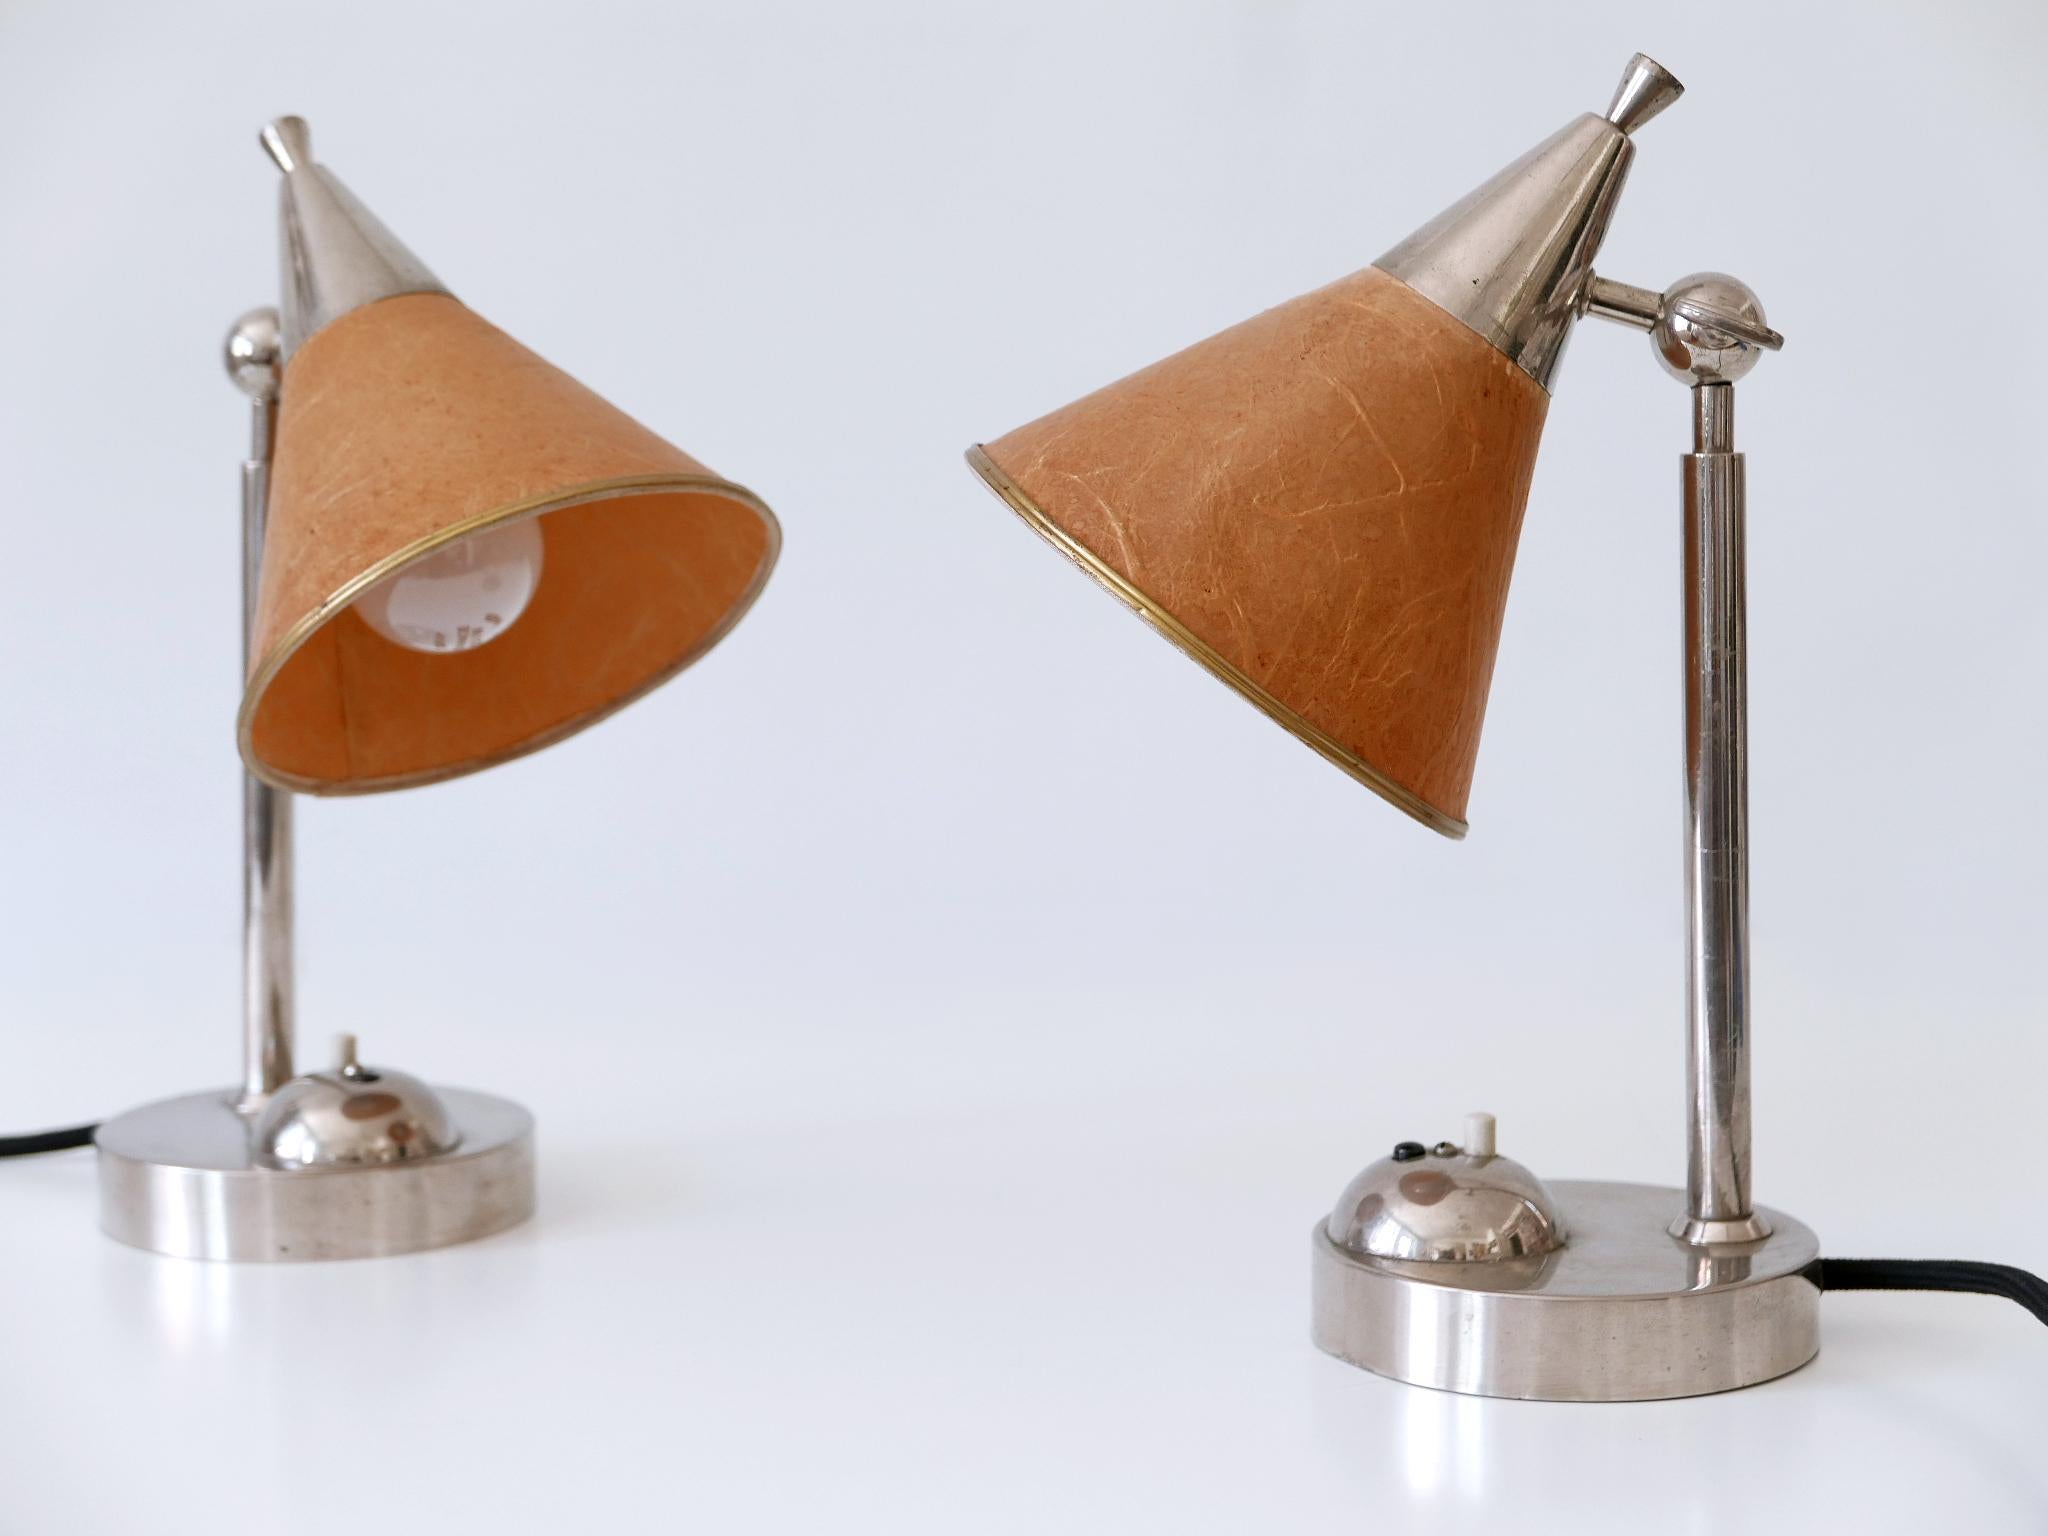 Set of Two Rare Art Deco Bauhaus Bedside Table Lamps or Sconces Germany 1920s For Sale 1